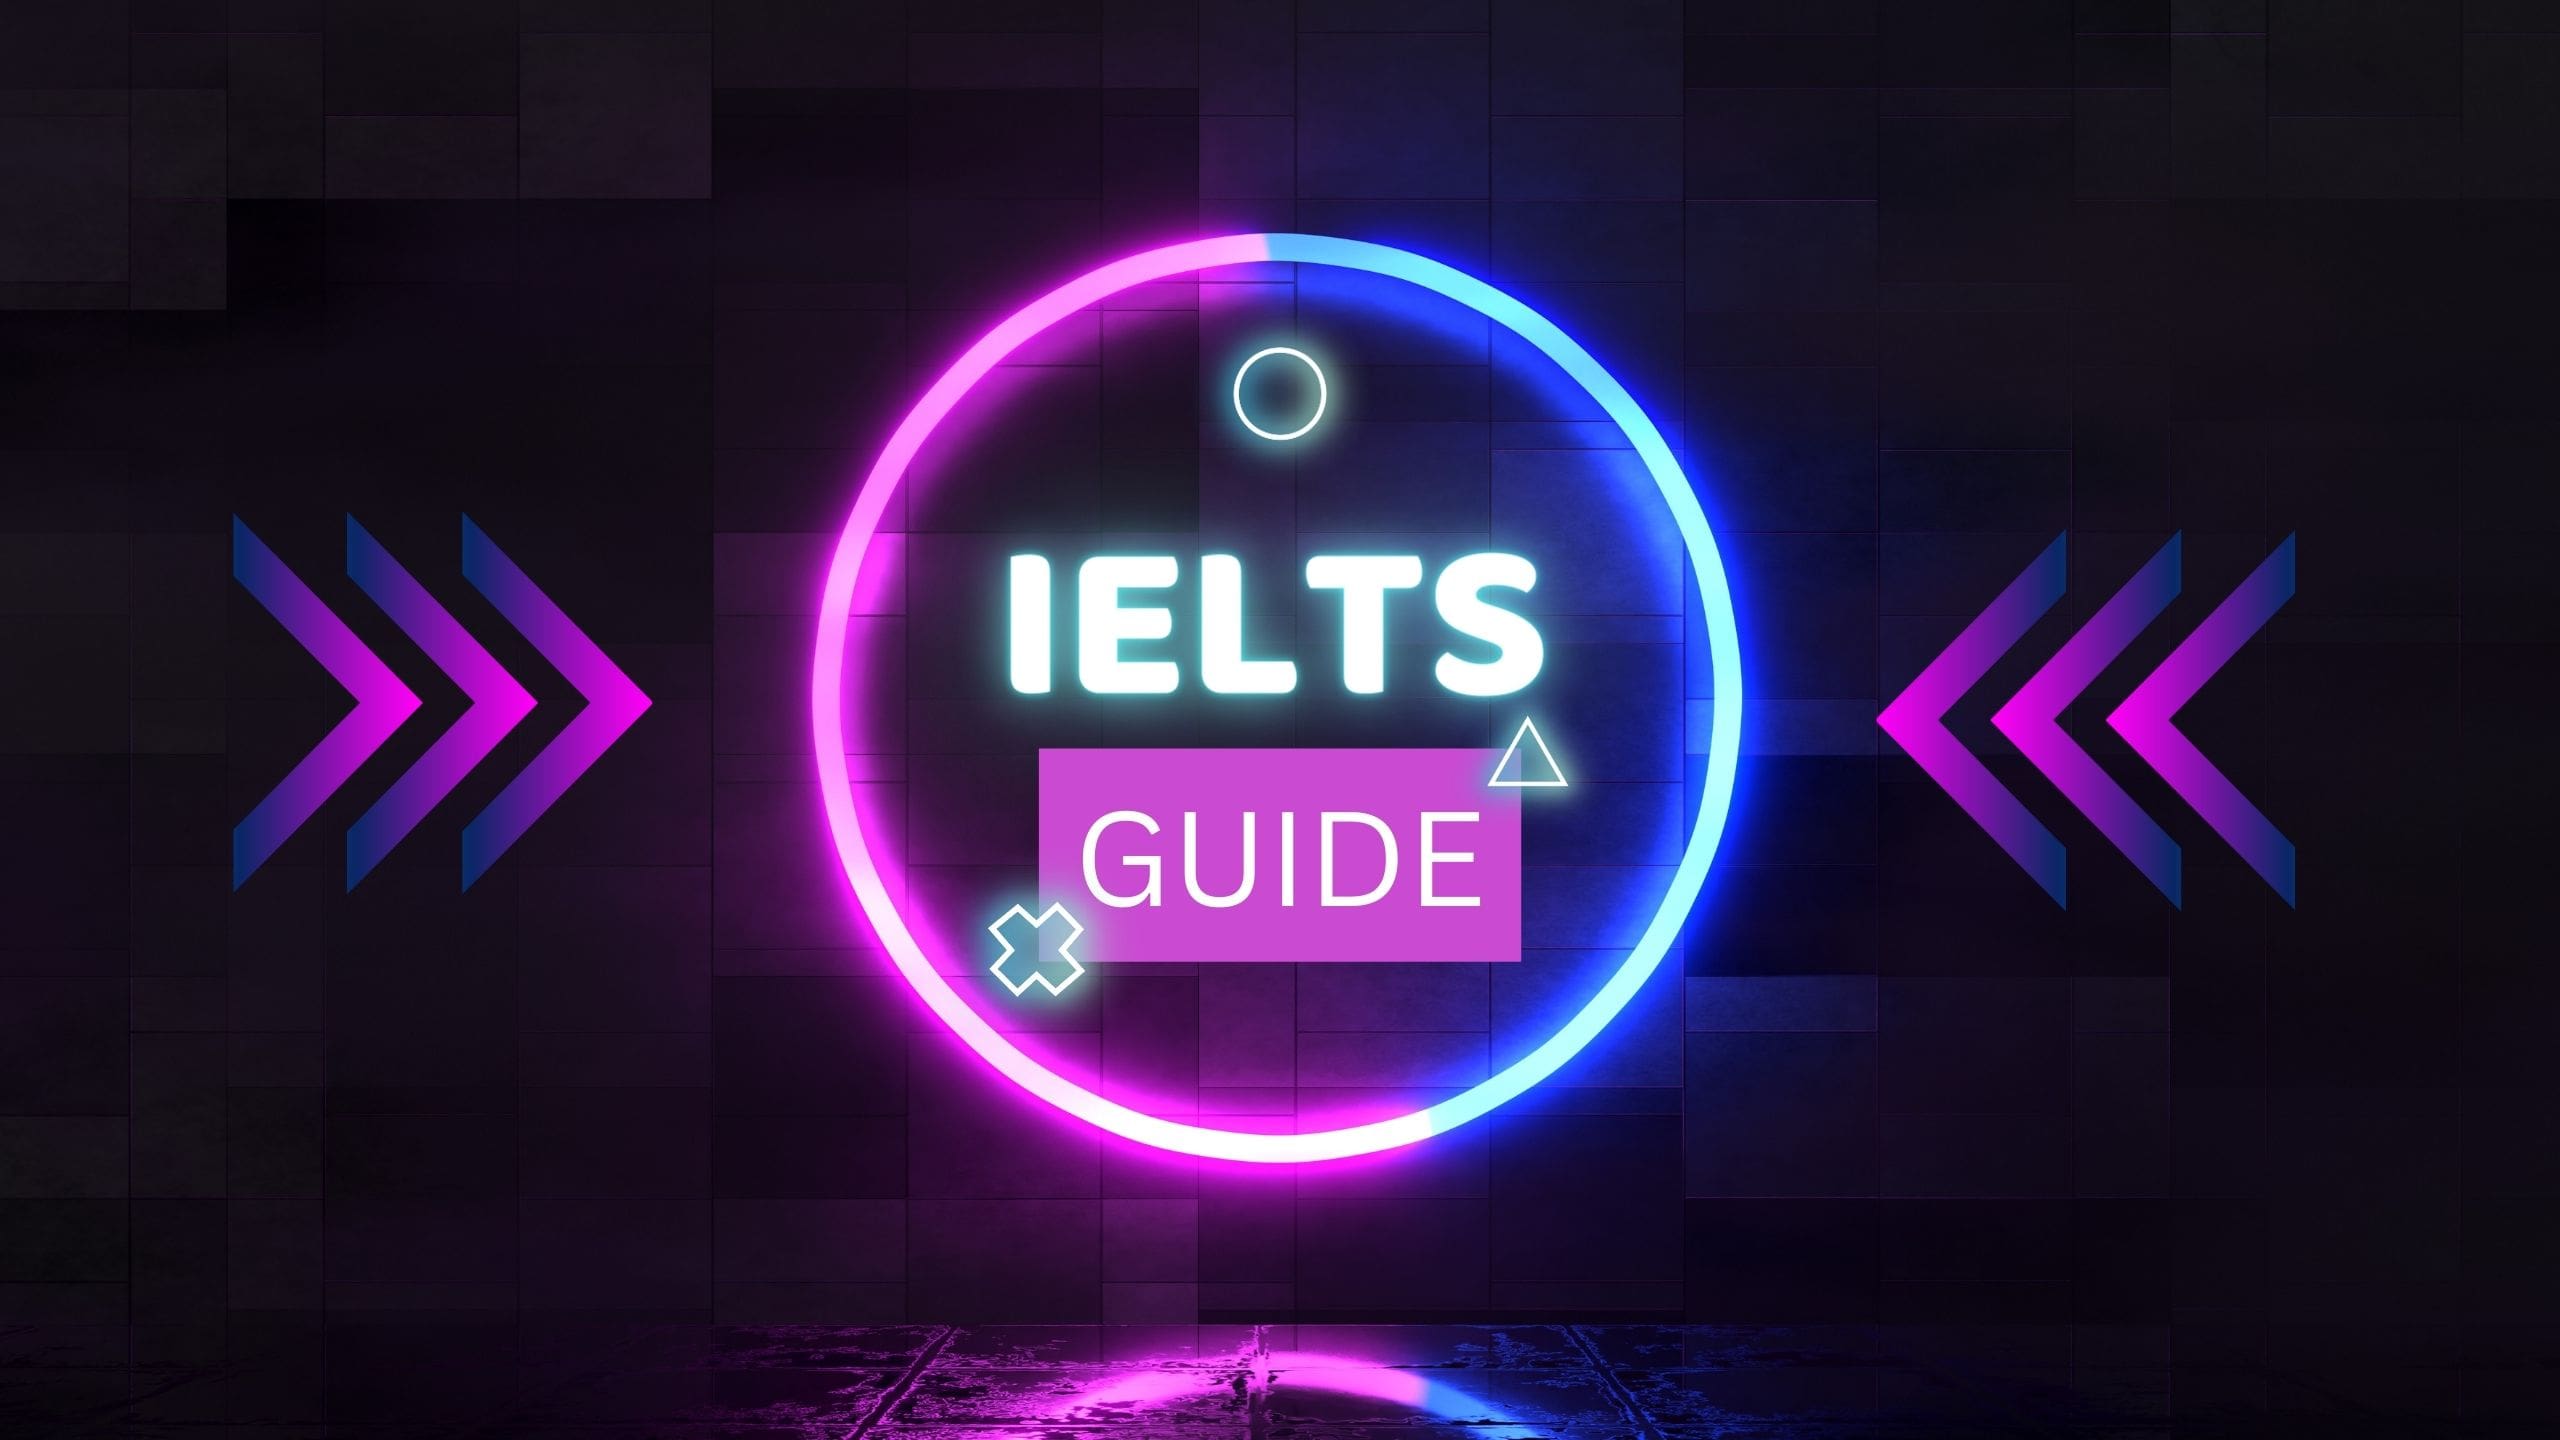 This IELTS Survival Guide will ensure you score 7+ bands in all areas of the exam while meeting the examiner marking criteria.